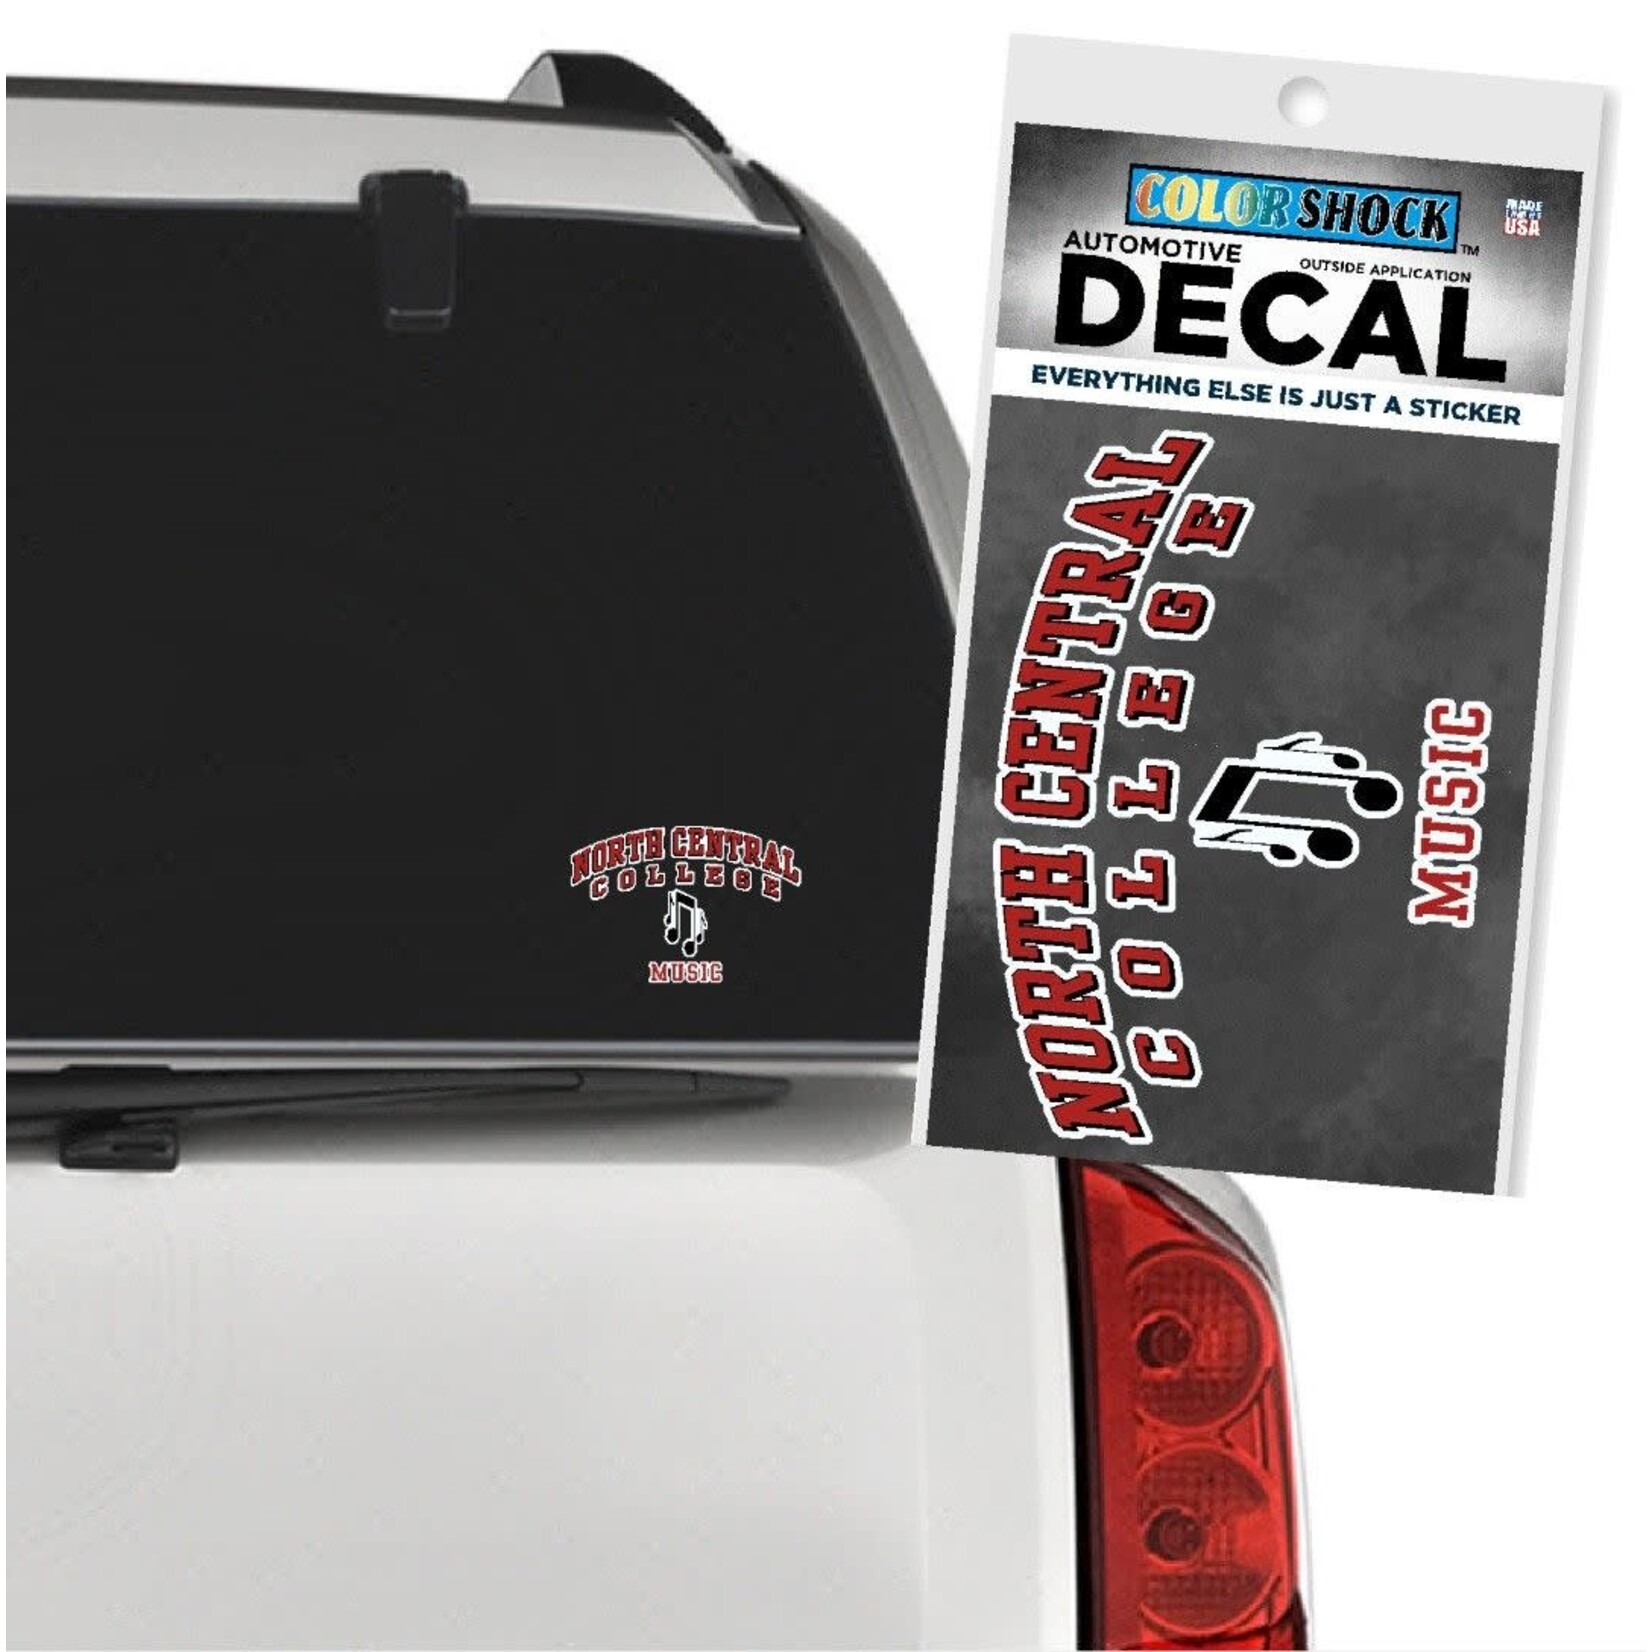 CDI Corporation Decal by Colorshock with Team Names  Music